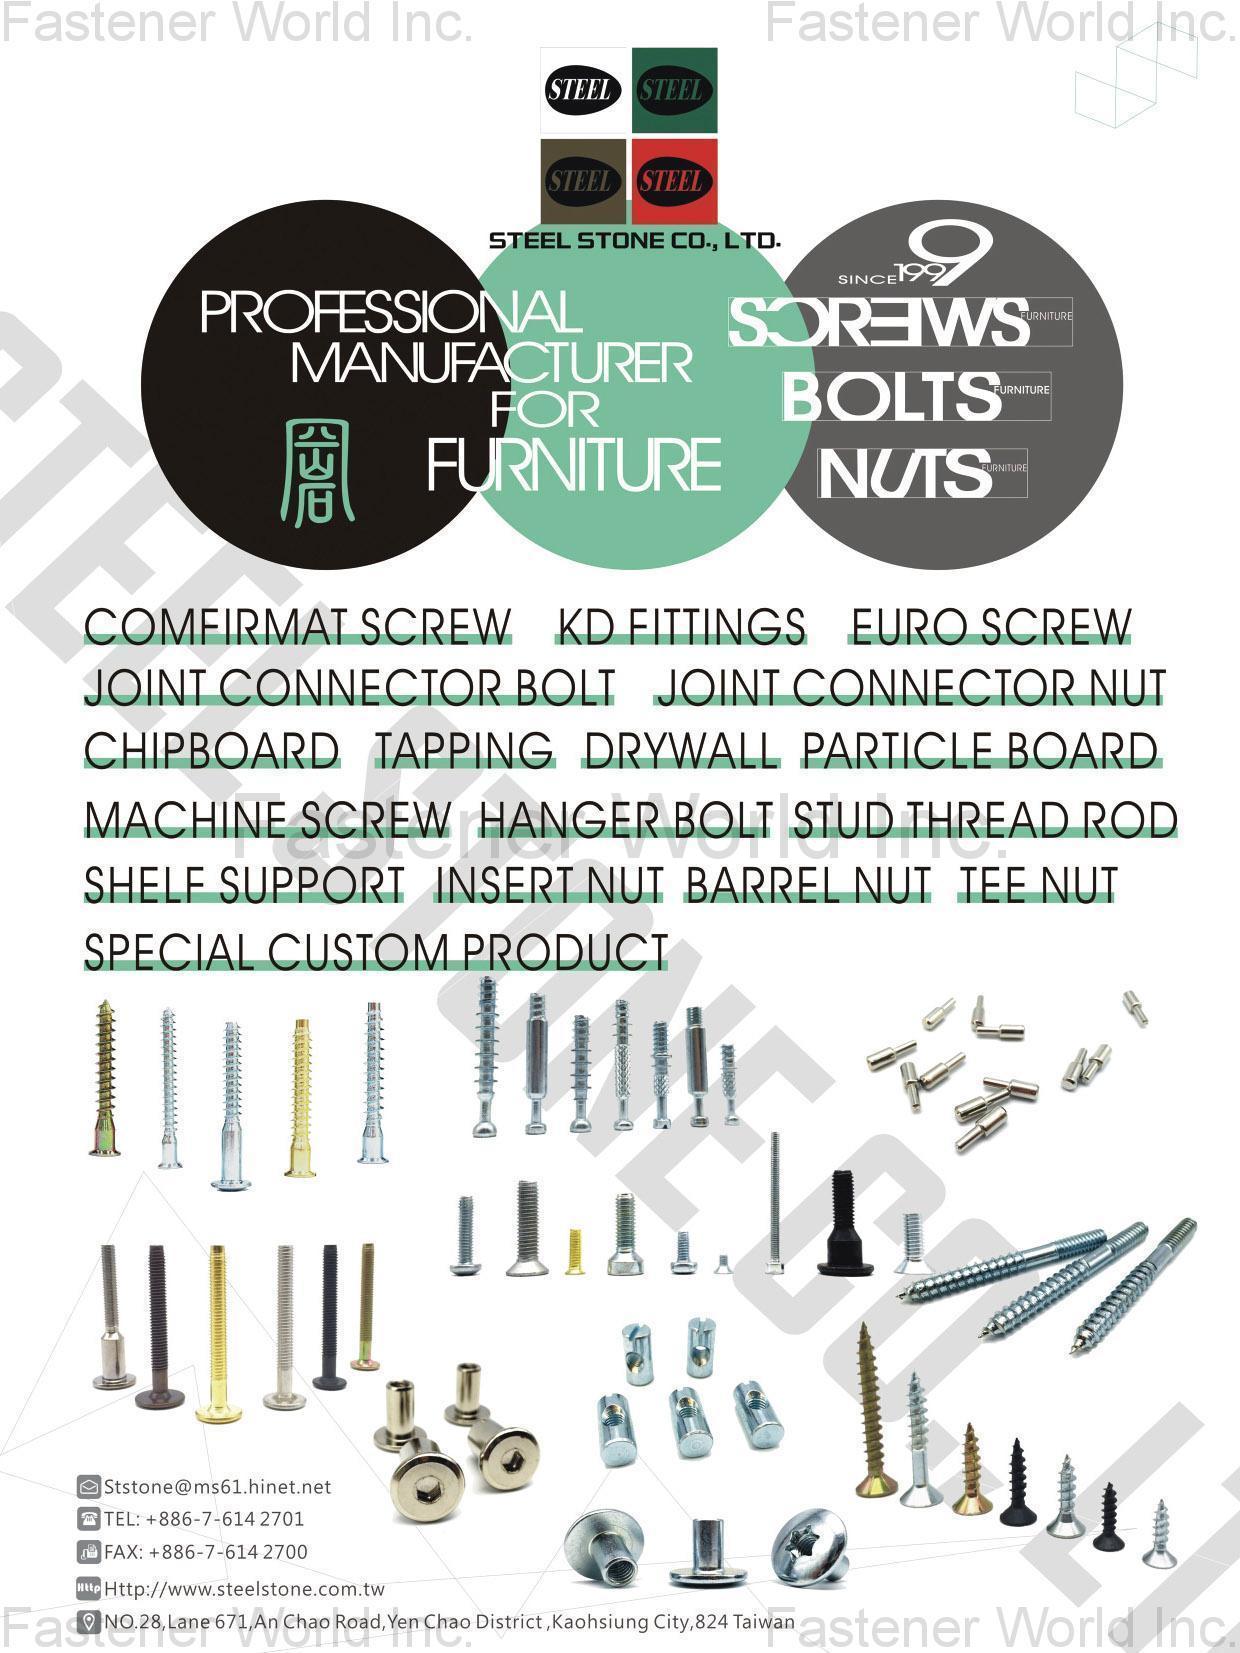 STEEL STONE CO., LTD.  , CONFIRMAT SCREWS, KD FITTINGS, JOINT CONNECTOR BOLTS, JOINT CONNECTOR NUTS, CHIPBOARD SCREW, PARTICLE BOARD SCREW, DRYWALL SCREW, TAPPING SCREW, MACHINE SCREW, EURO SCREW, HANGER BOLT, STUD THREAD ROD, SHELF SUPPORT, INSERT NUT, BARREL NUT, TEE NUT, CUSTOM-MADE PRODUCTS